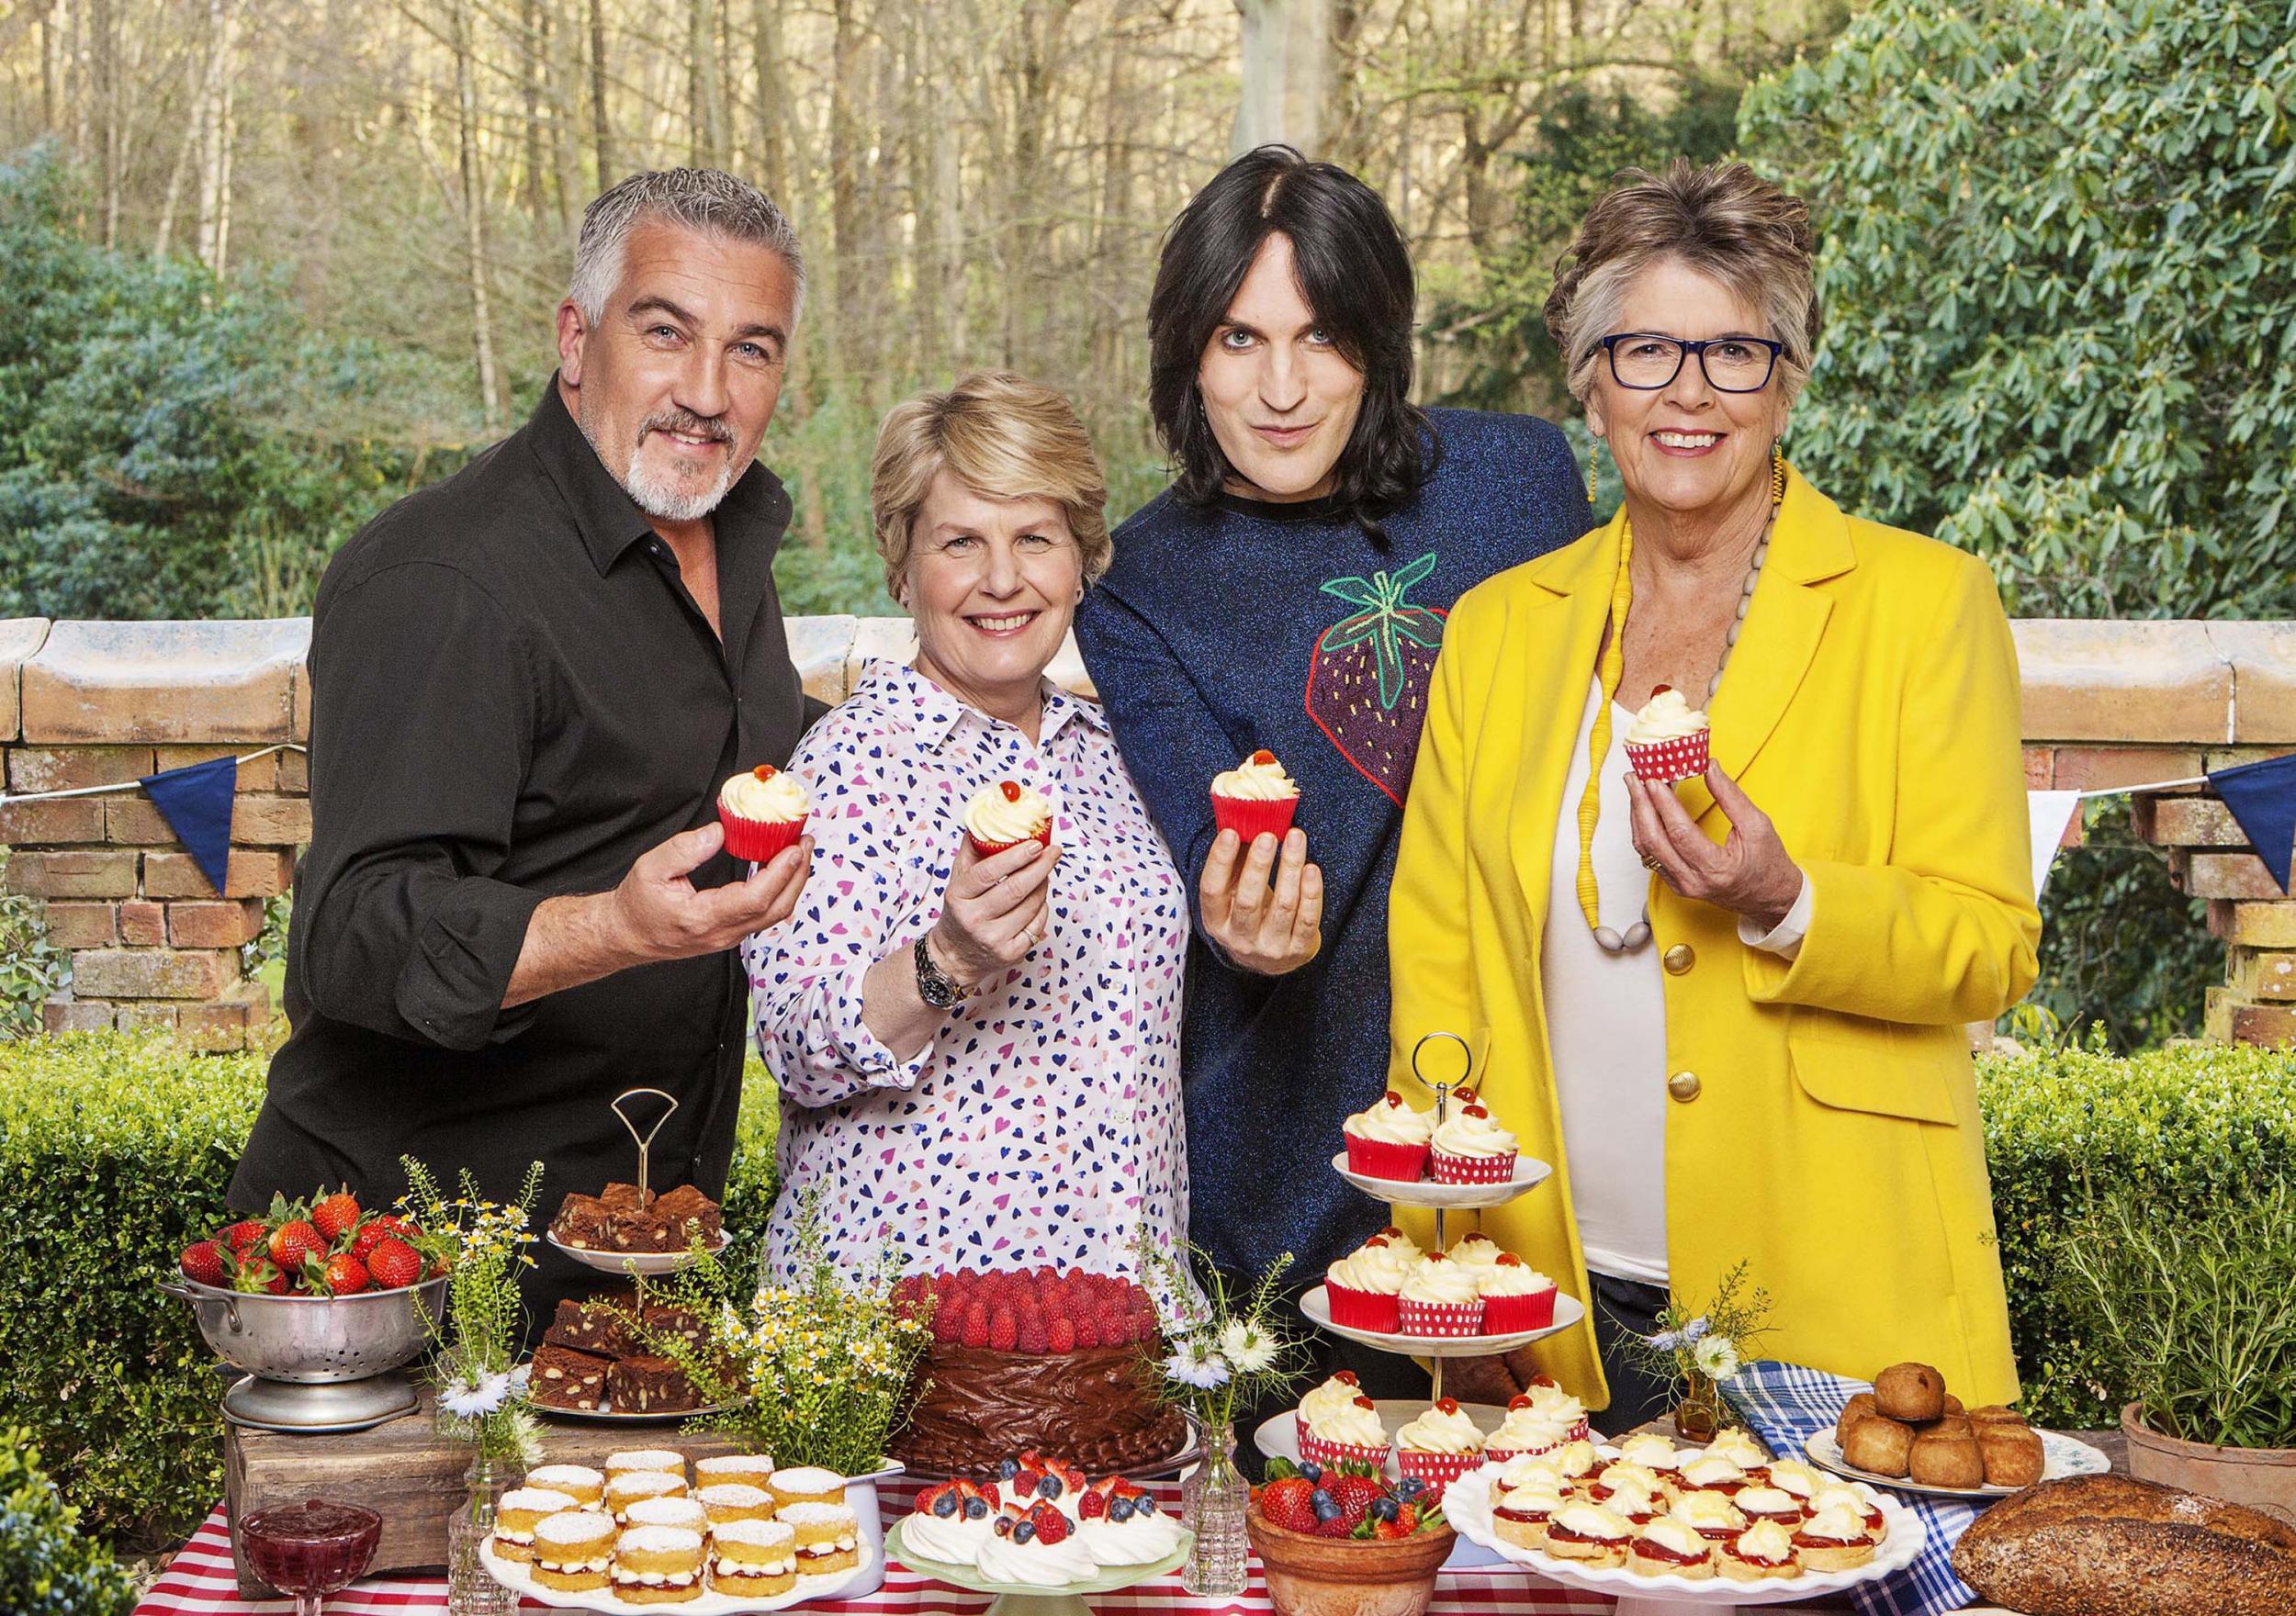 Up for the cupcakes: judges and presenters prepare for Tuesday’s GBBO final